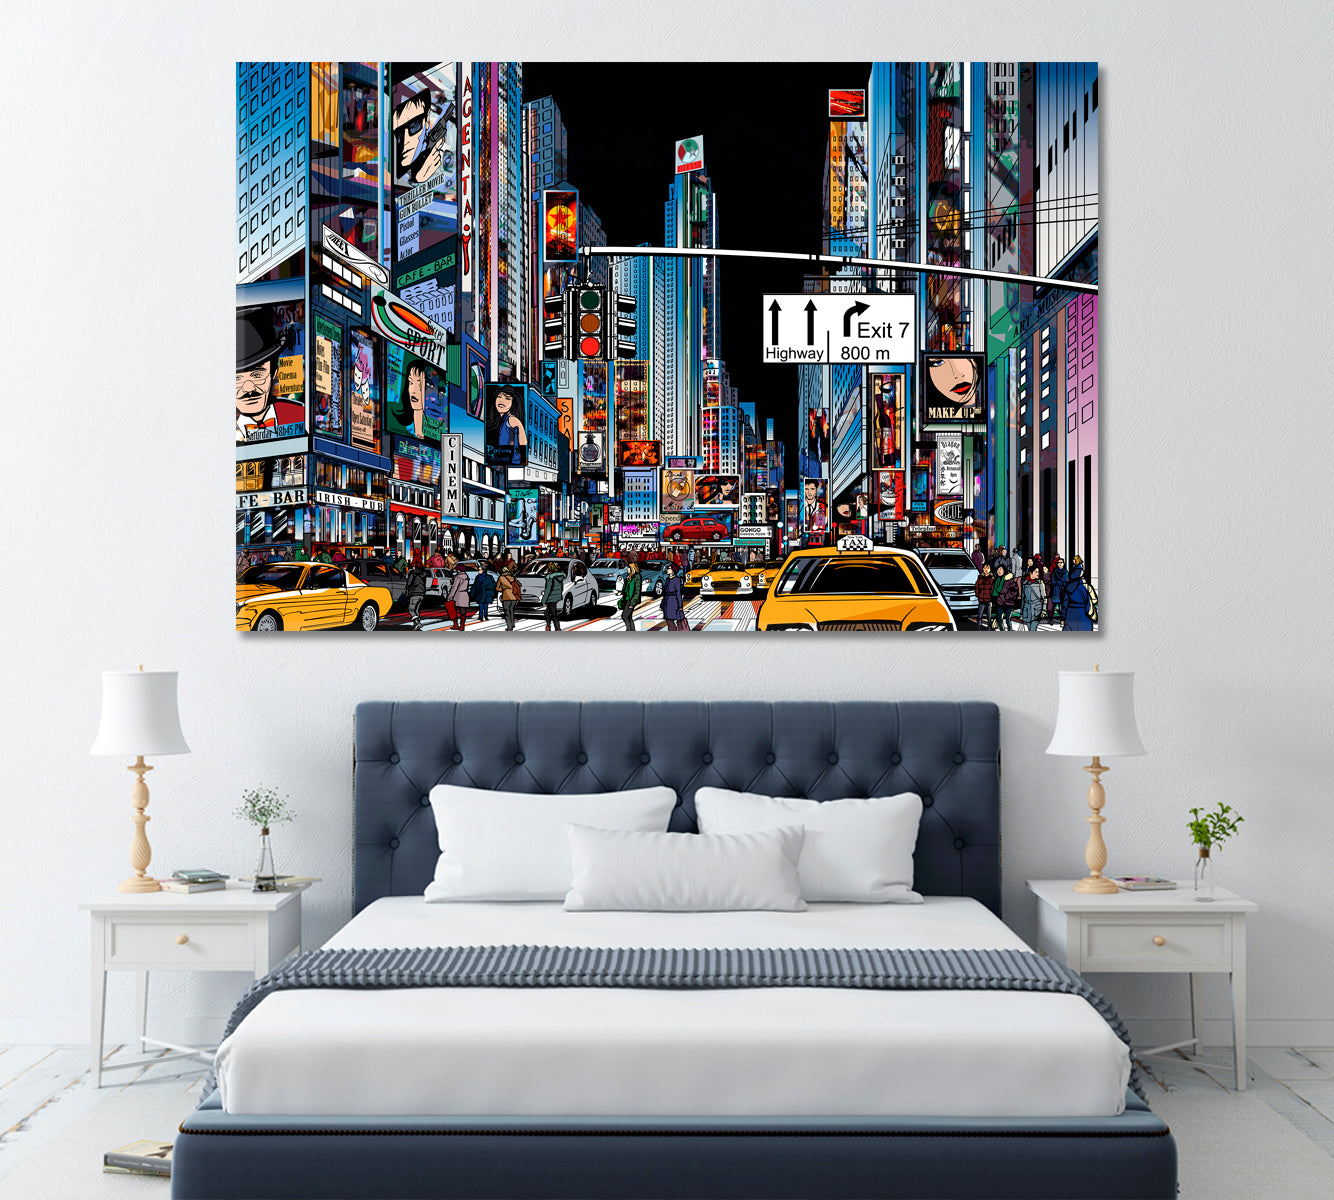 New York at Night Canvas Print ArtLexy 1 Panel 24"x16" inches 